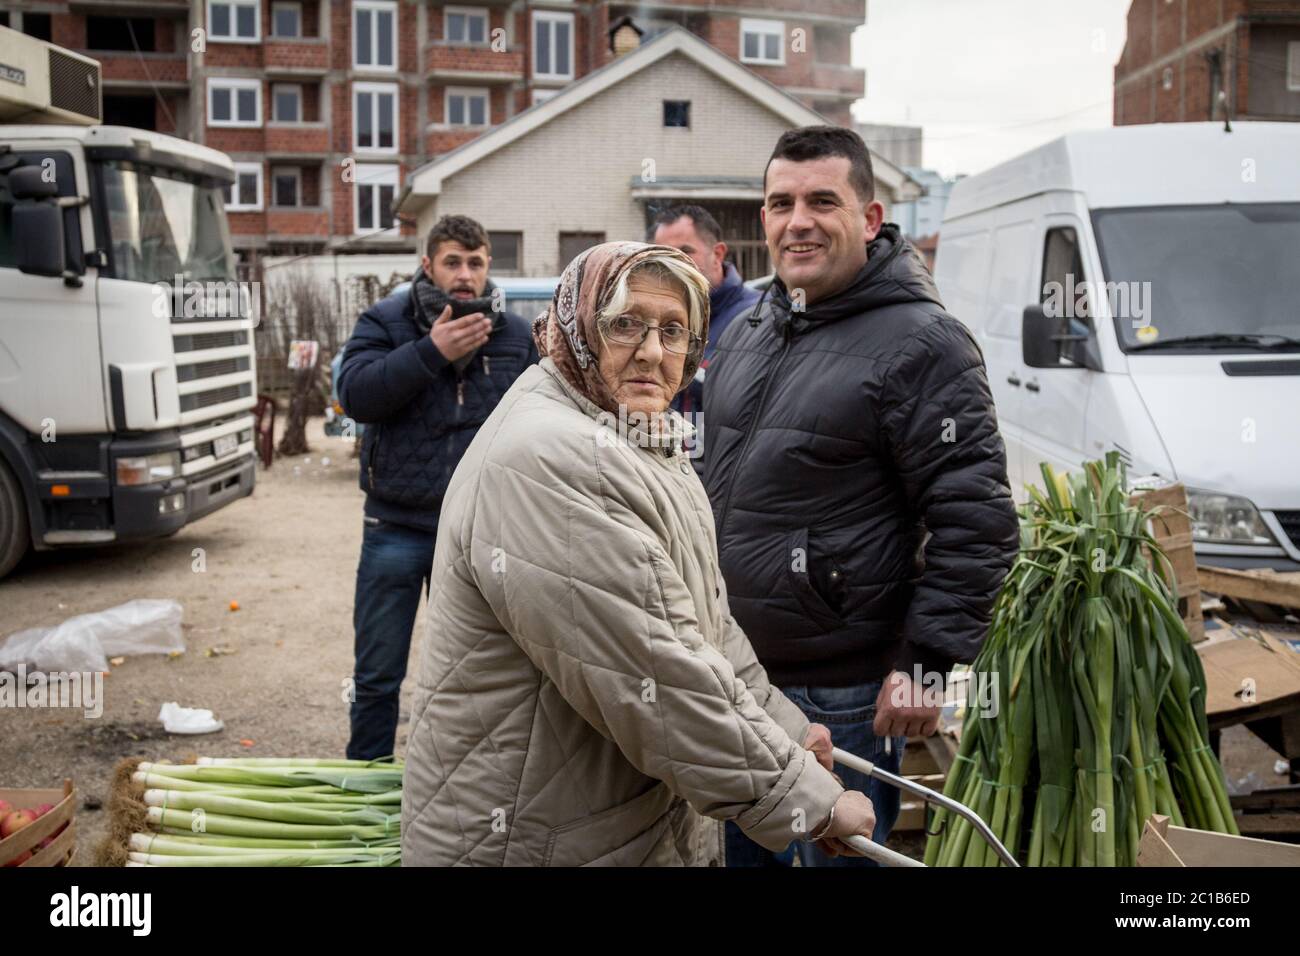 GNJILANE, GJILAN - KOSOVO - JANUARY 2, 2016: Old woman selling vegetables  on the Gjilan bazaar, one of the biggest markets of Eastern Kosovo, while y Stock Photo